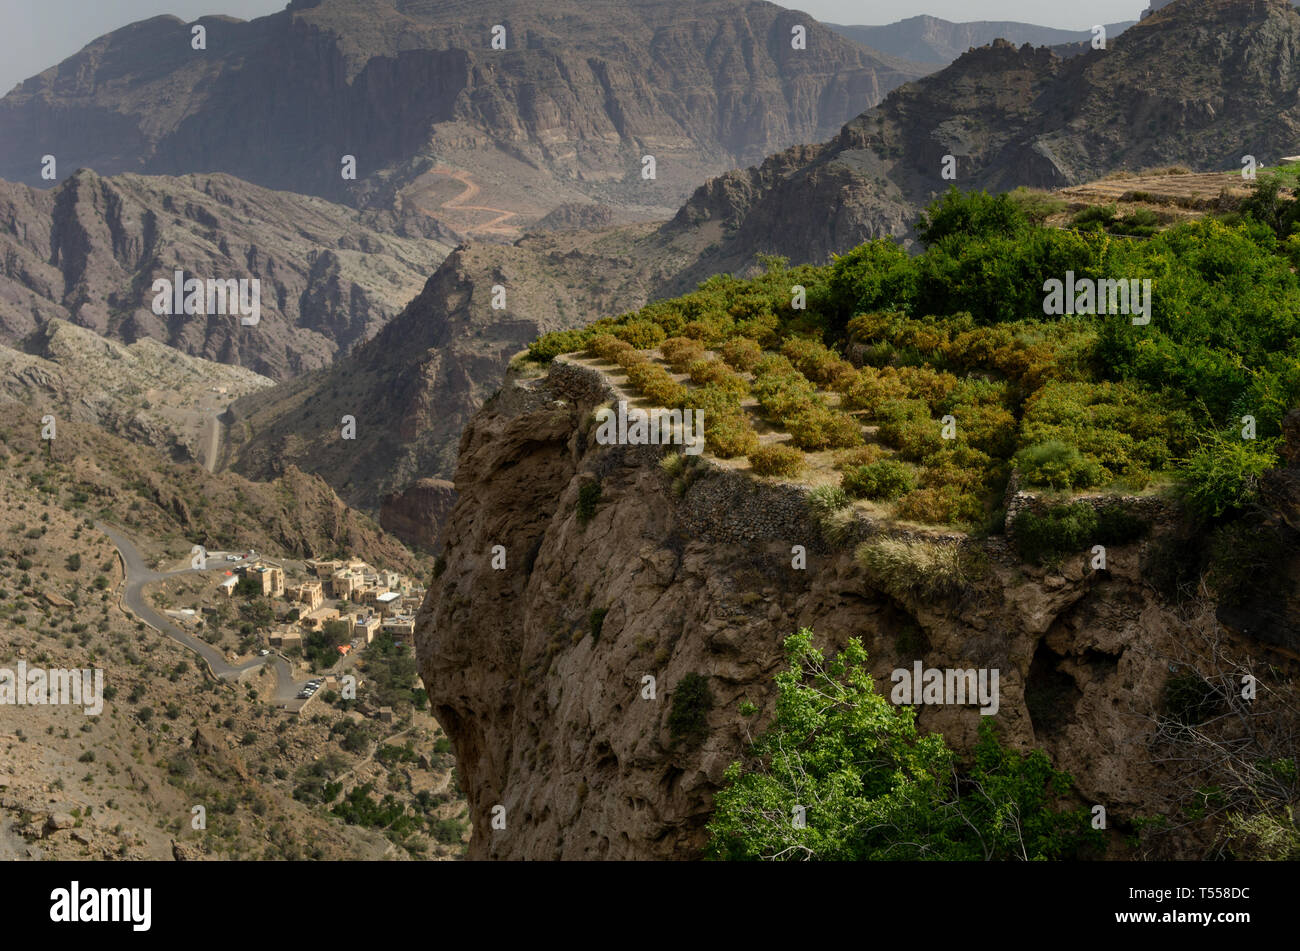 The green mountains called Jebel Akhdar of the Hajar mountain range, the harsh interior of Oman, home of traditional rose harvesting and fruit farming Stock Photo